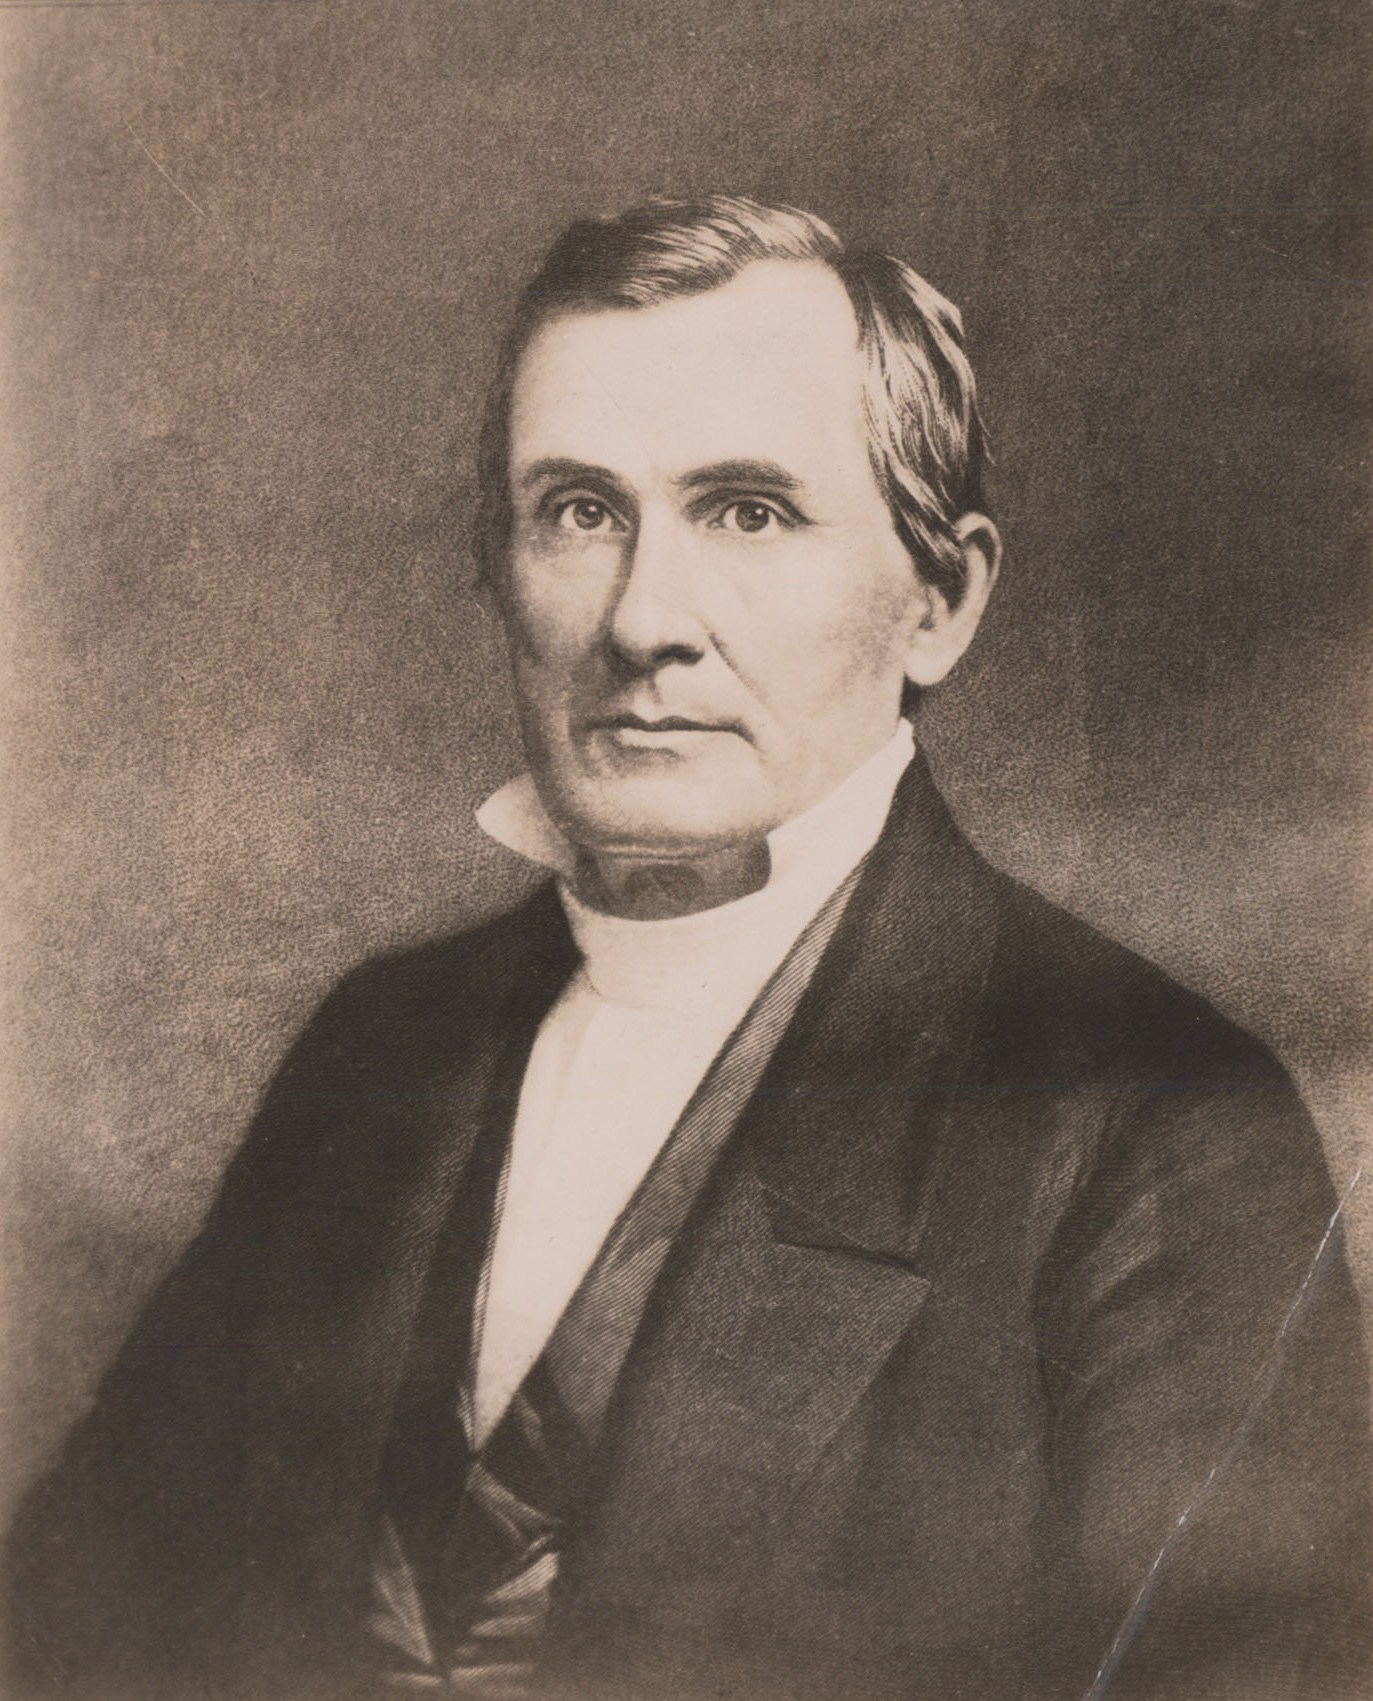 George Junkin from his time at Washington College